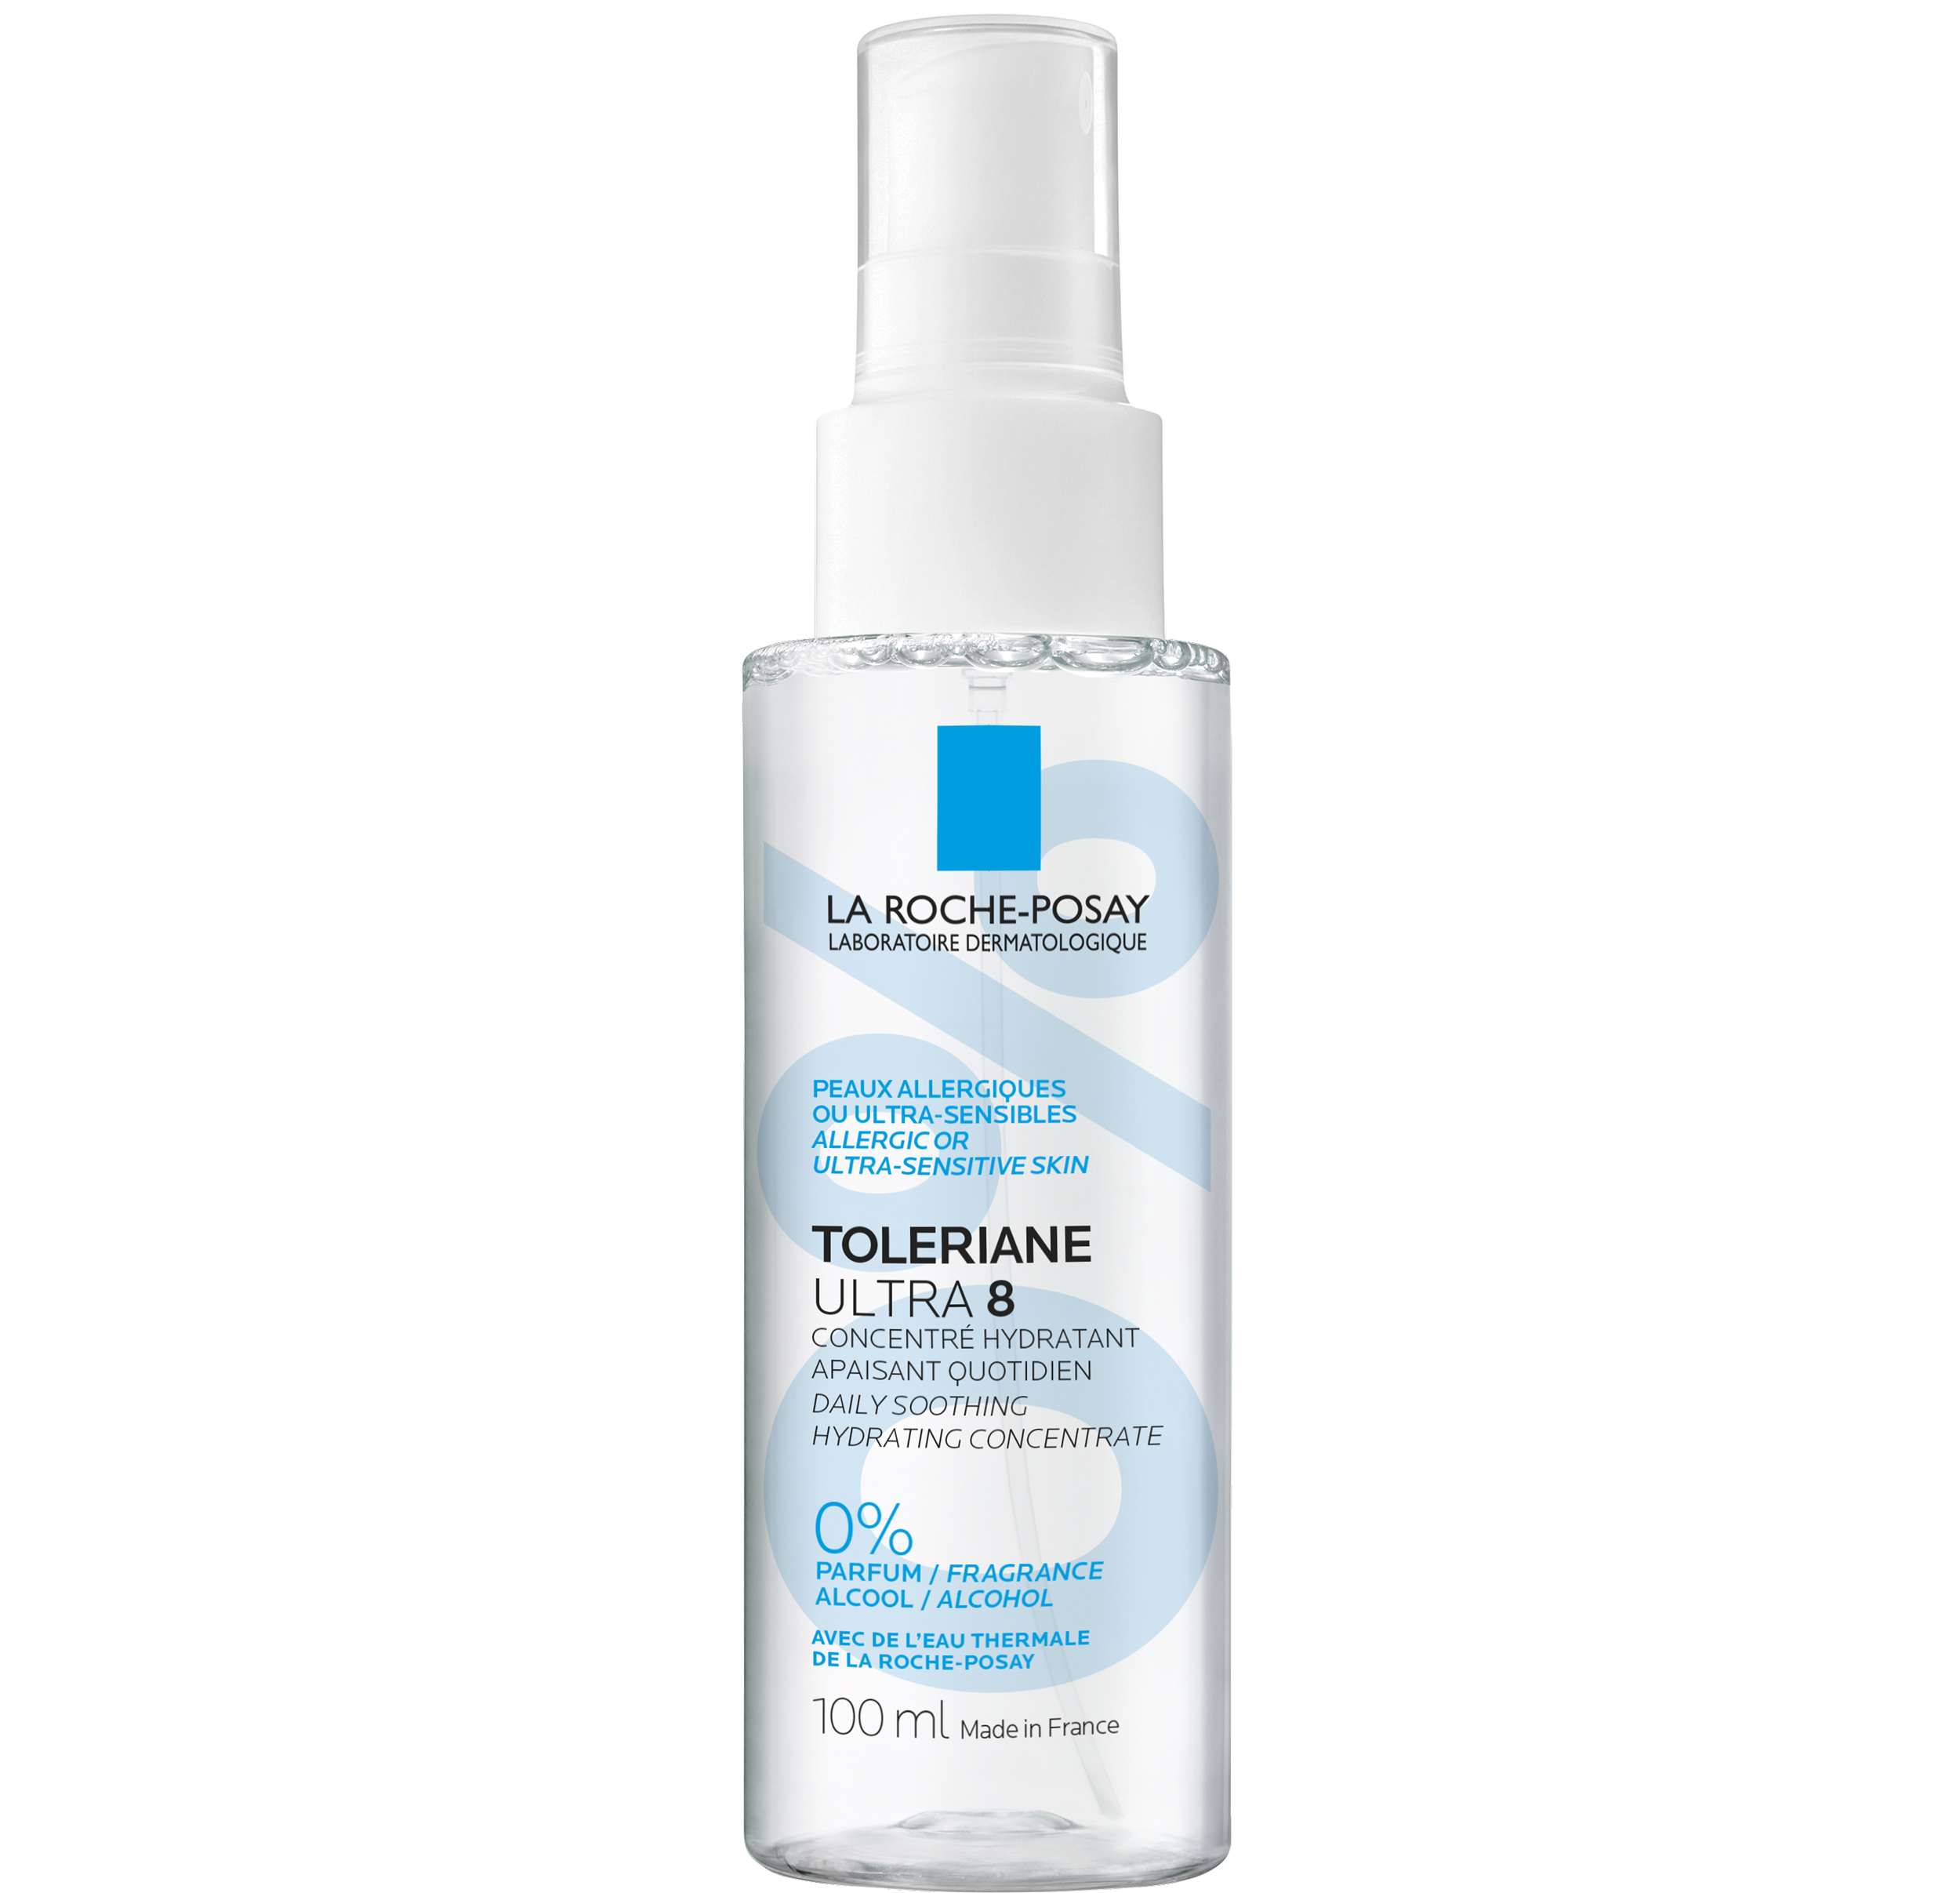 La Roche-Posay Toleriane Ultra 8 Daily Soothing Hydrating Concentrate